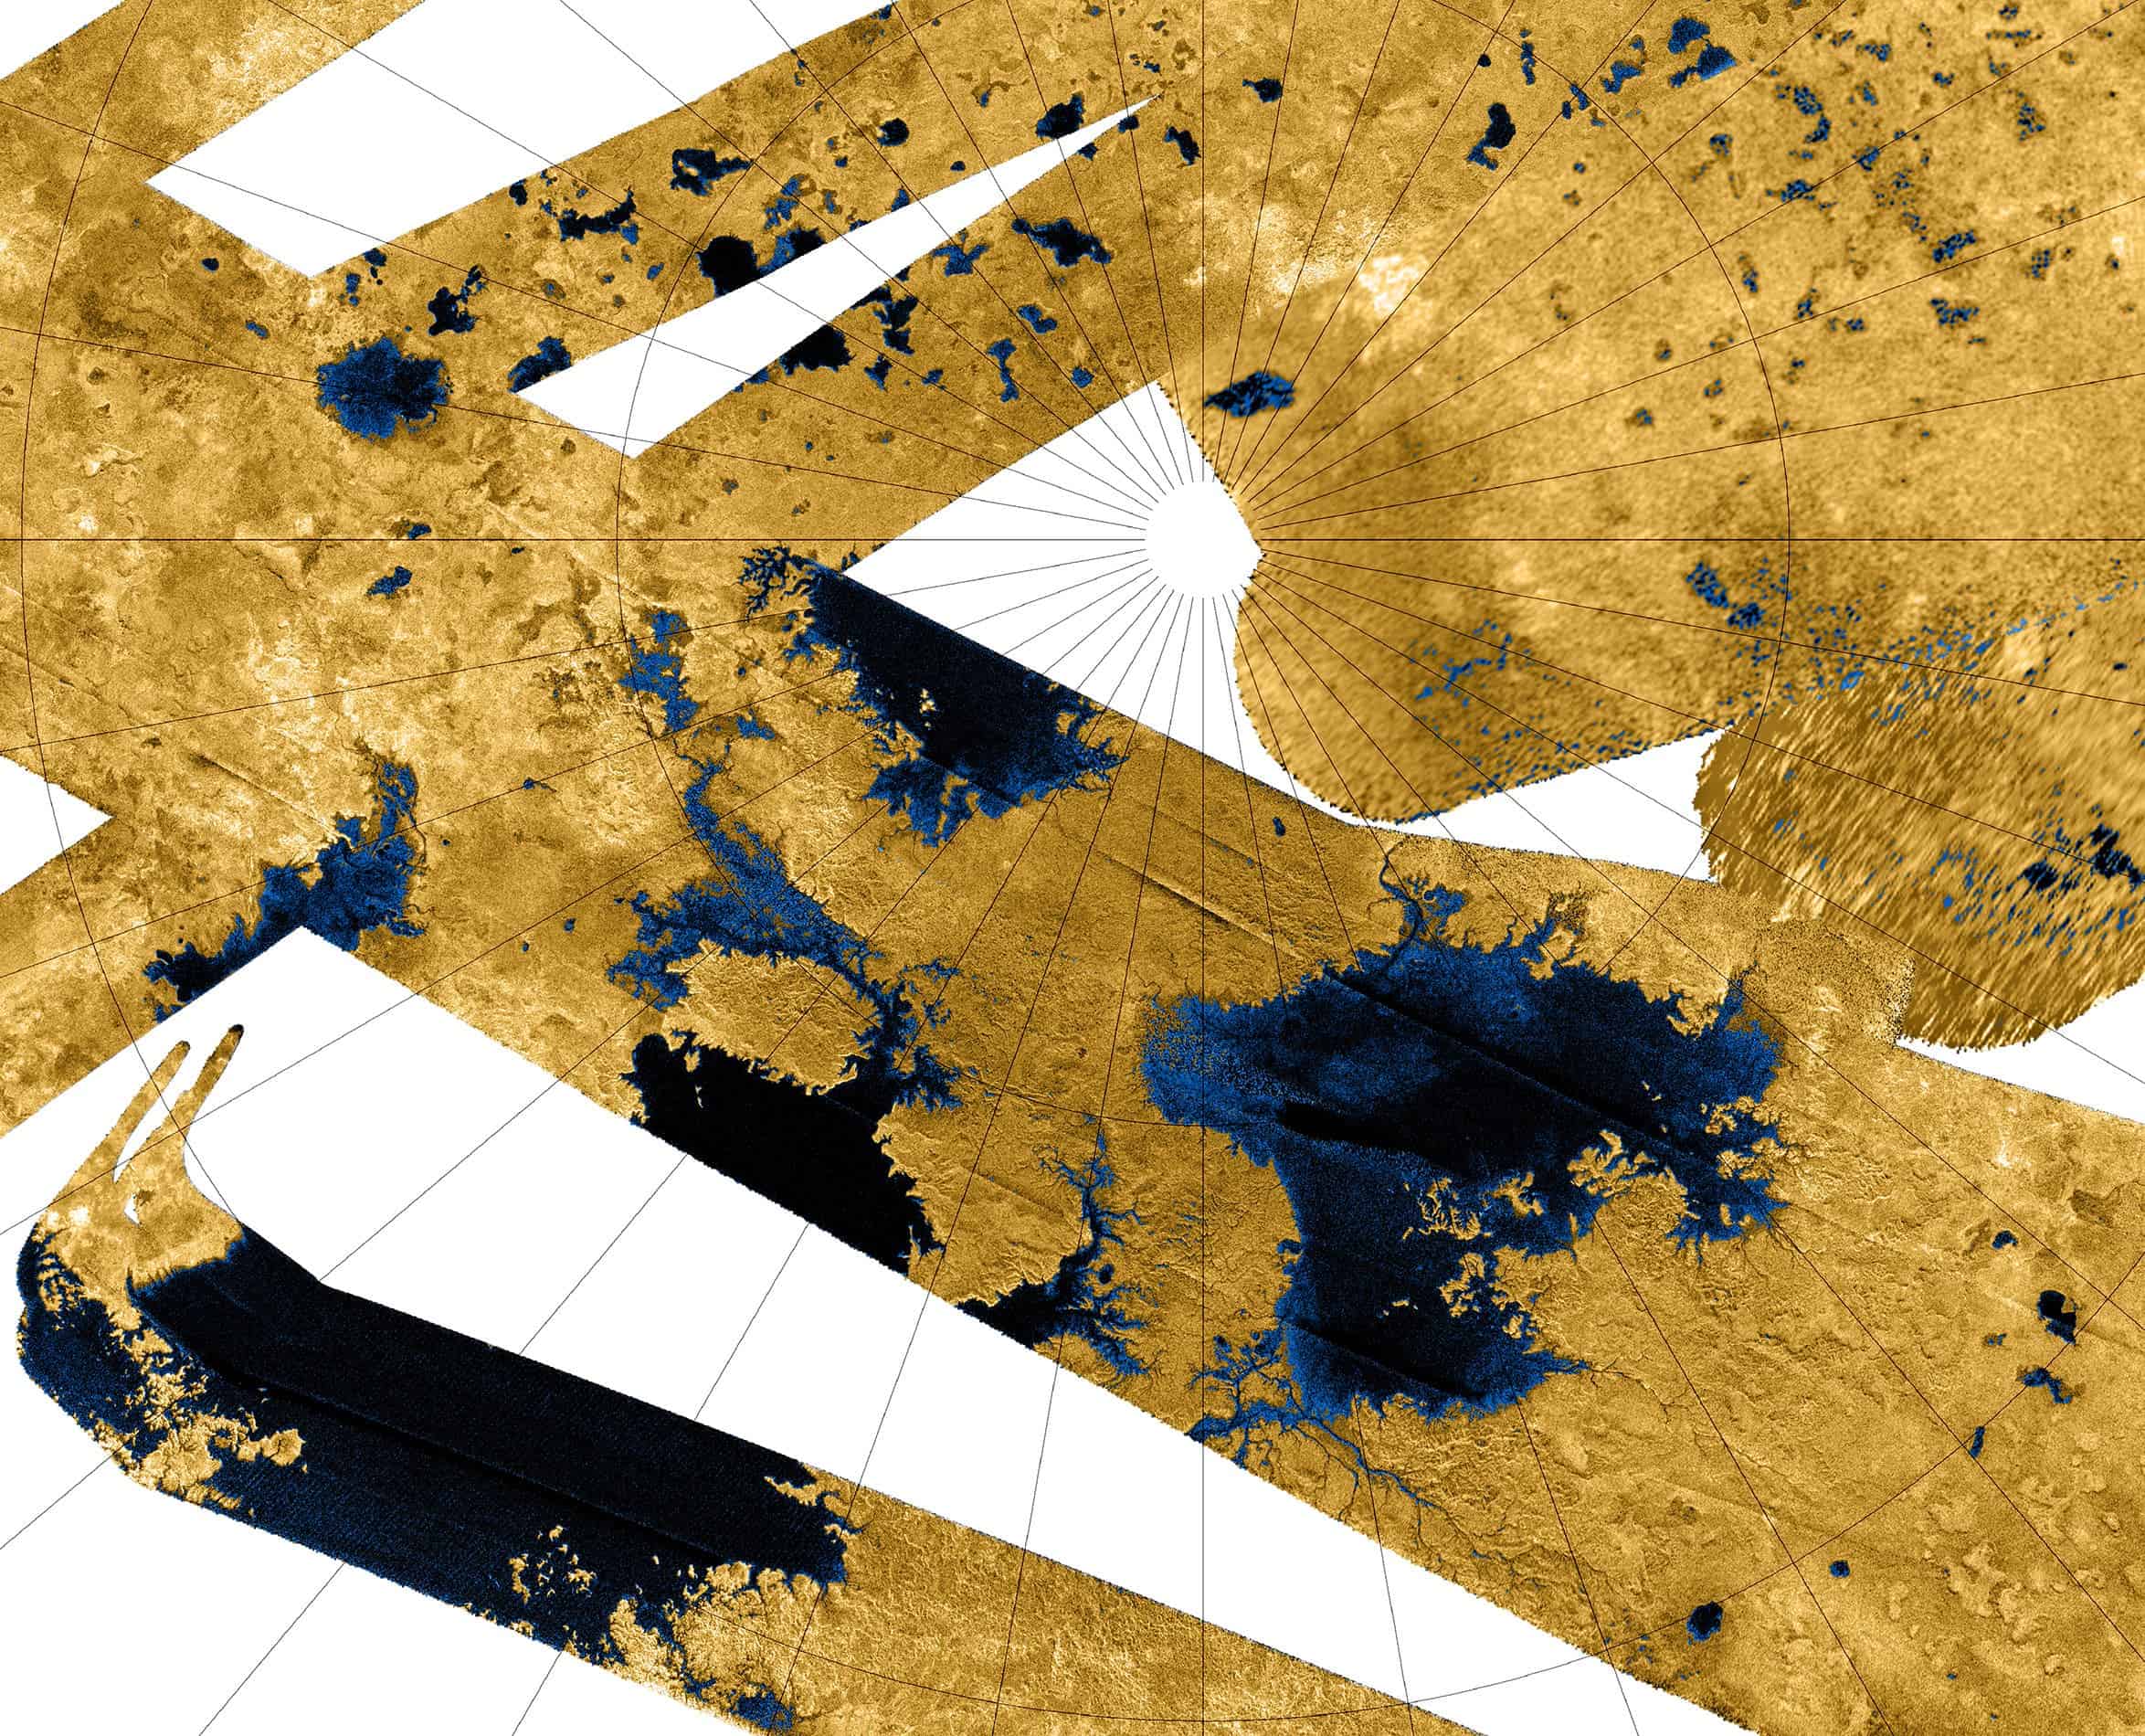 A false-color radar mosaic of Titan's north polar region. Blue coloring depicts hydrocarbon seas, lakes and tributary networks filled with liquid ethane, methane and dissolved Nitrogen. Image credits: NASA / JPL-Caltech / USGS.